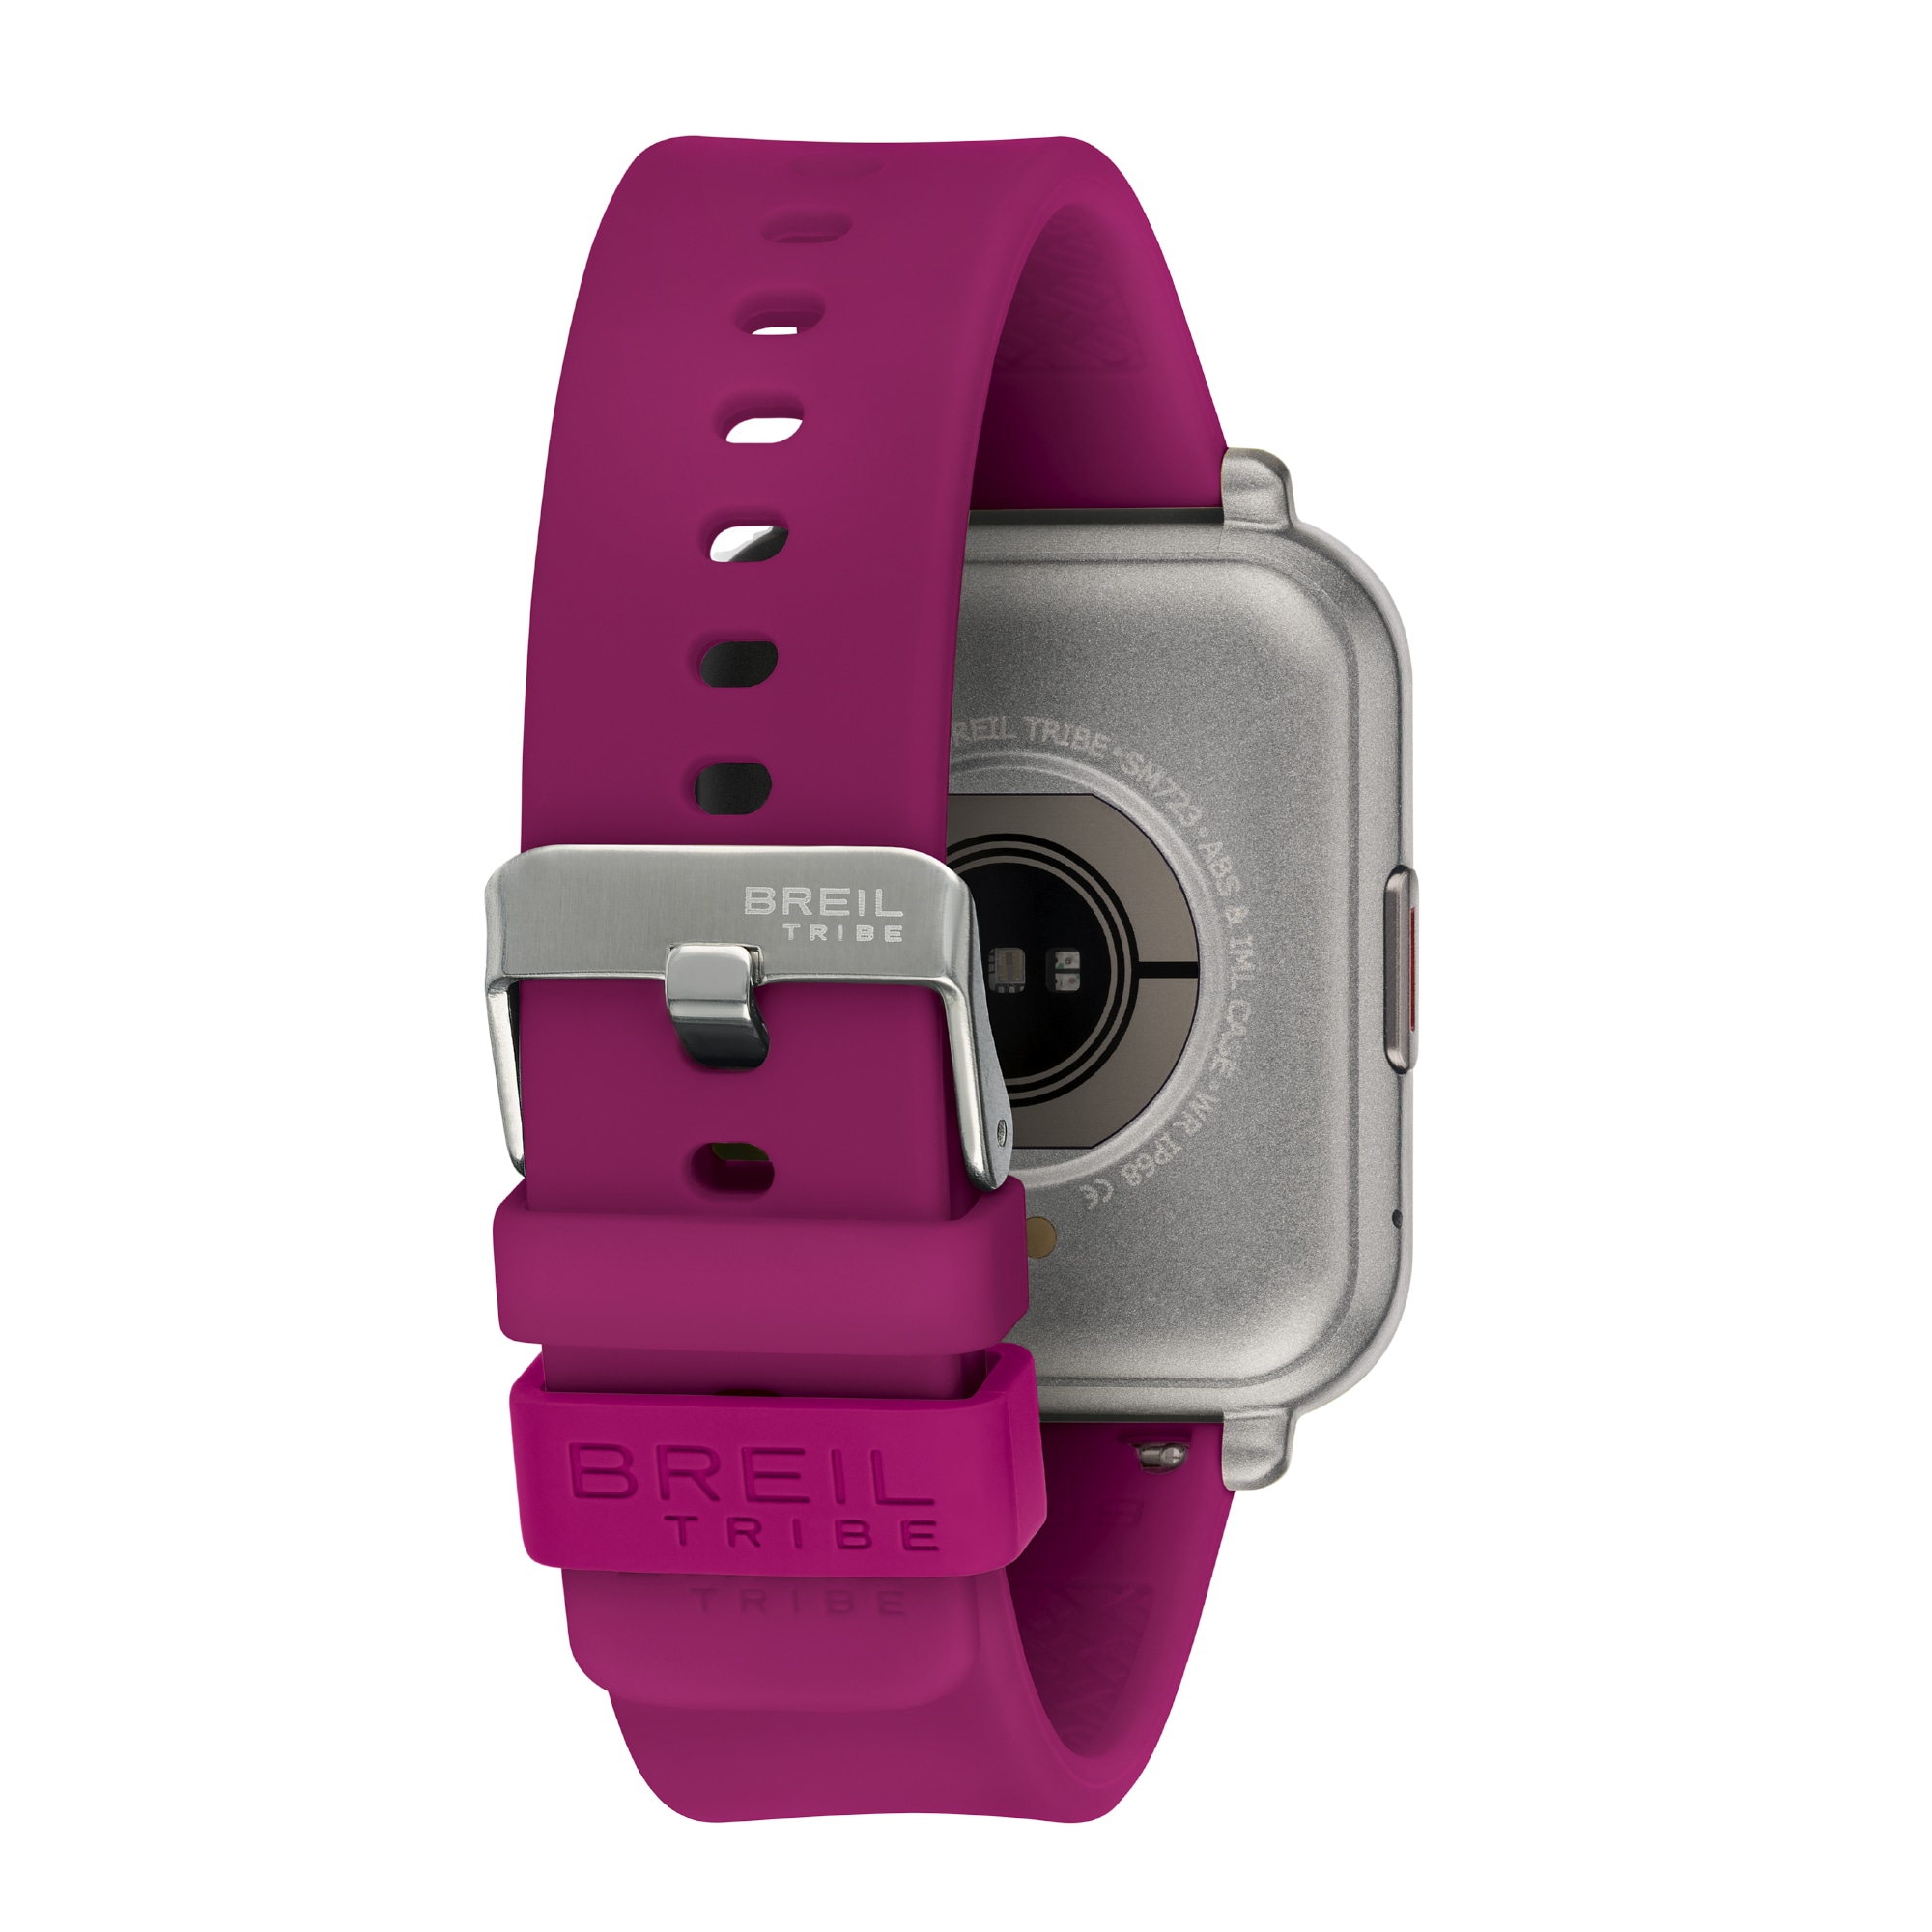 SBT-2 - UNISEX SMARTWATCH WITH DOUBLE STRAP EW0672 - Breil Official